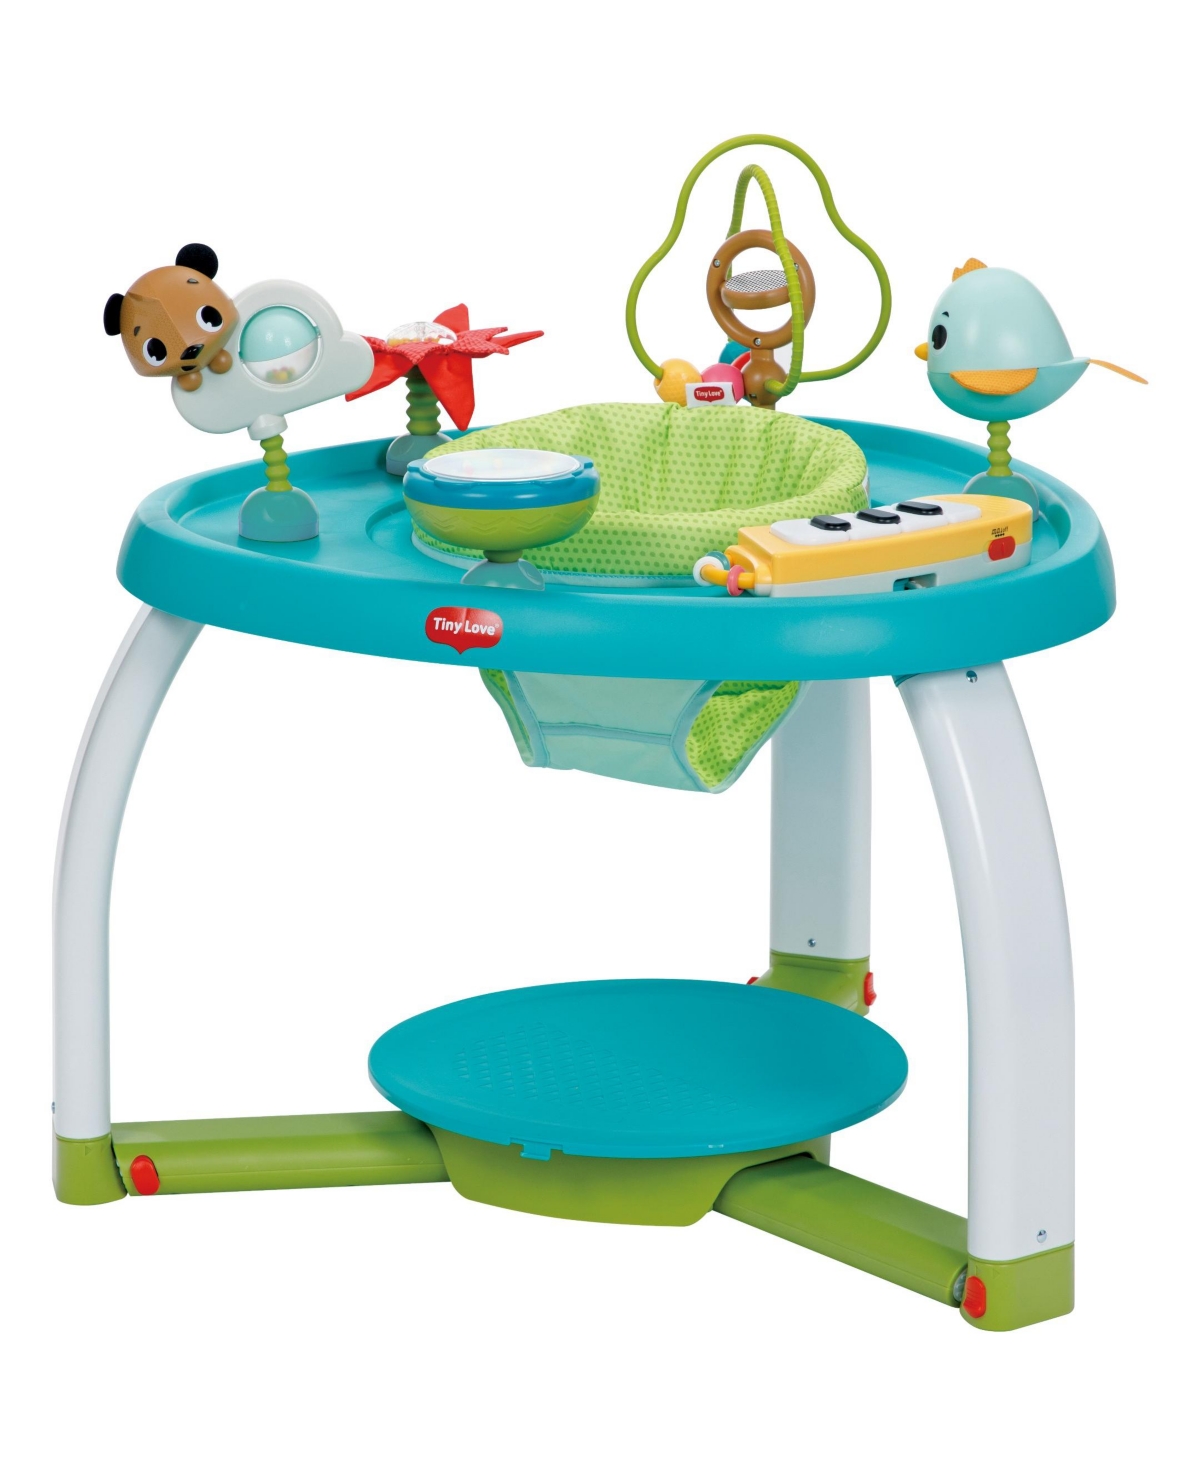 Tiny Love Infant And Toddler Stationary Activity Center In Meadow Days